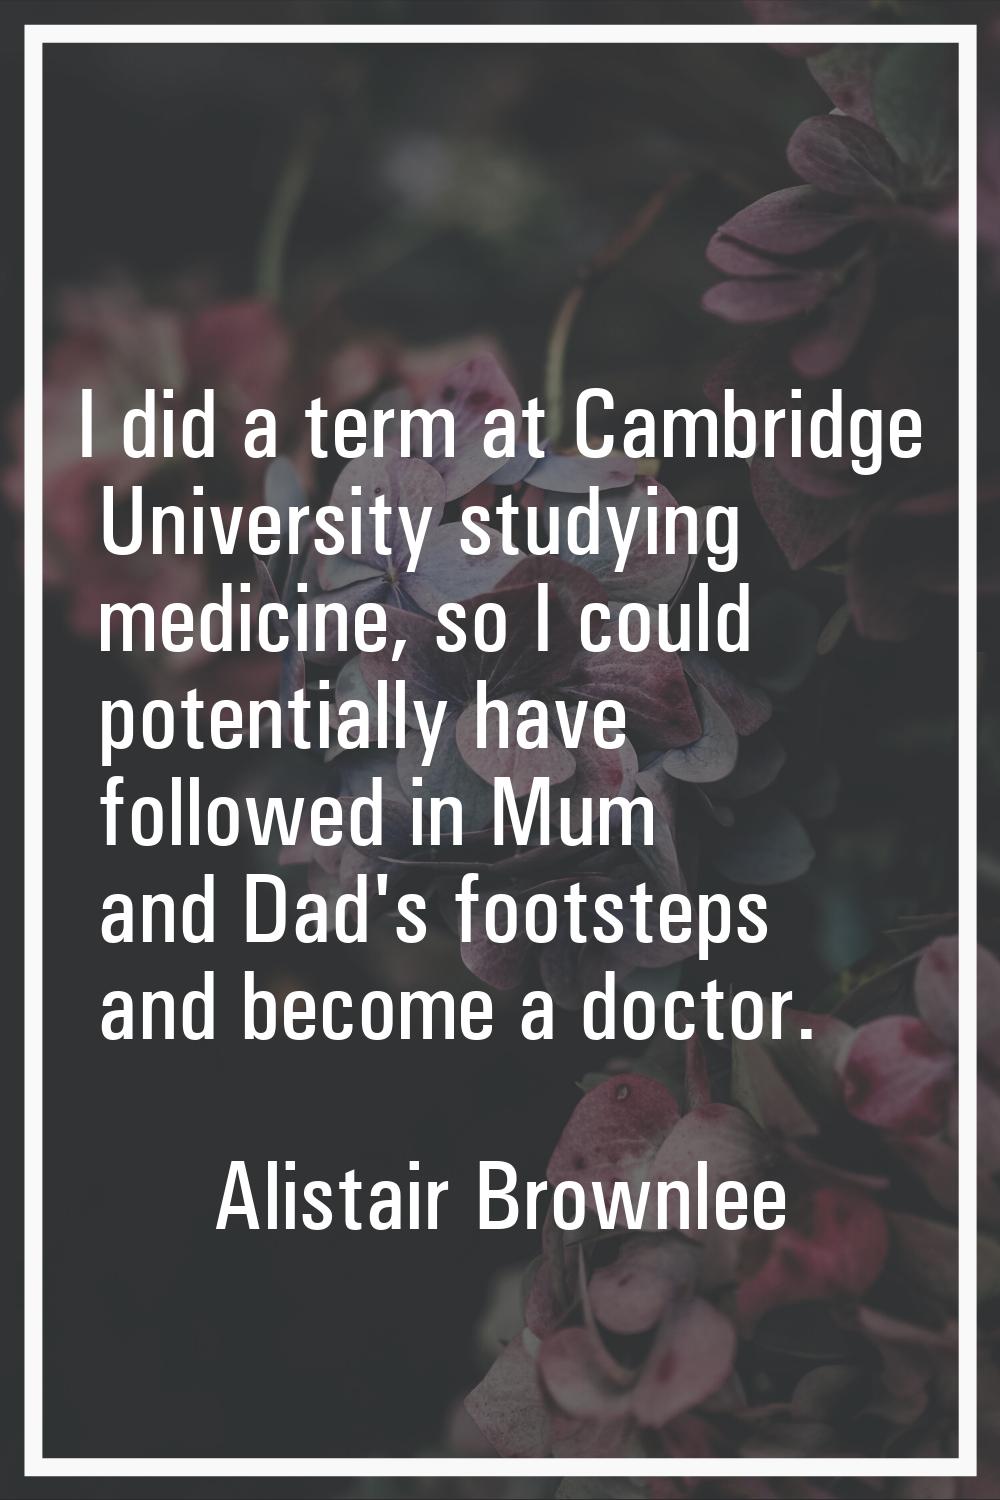 I did a term at Cambridge University studying medicine, so I could potentially have followed in Mum